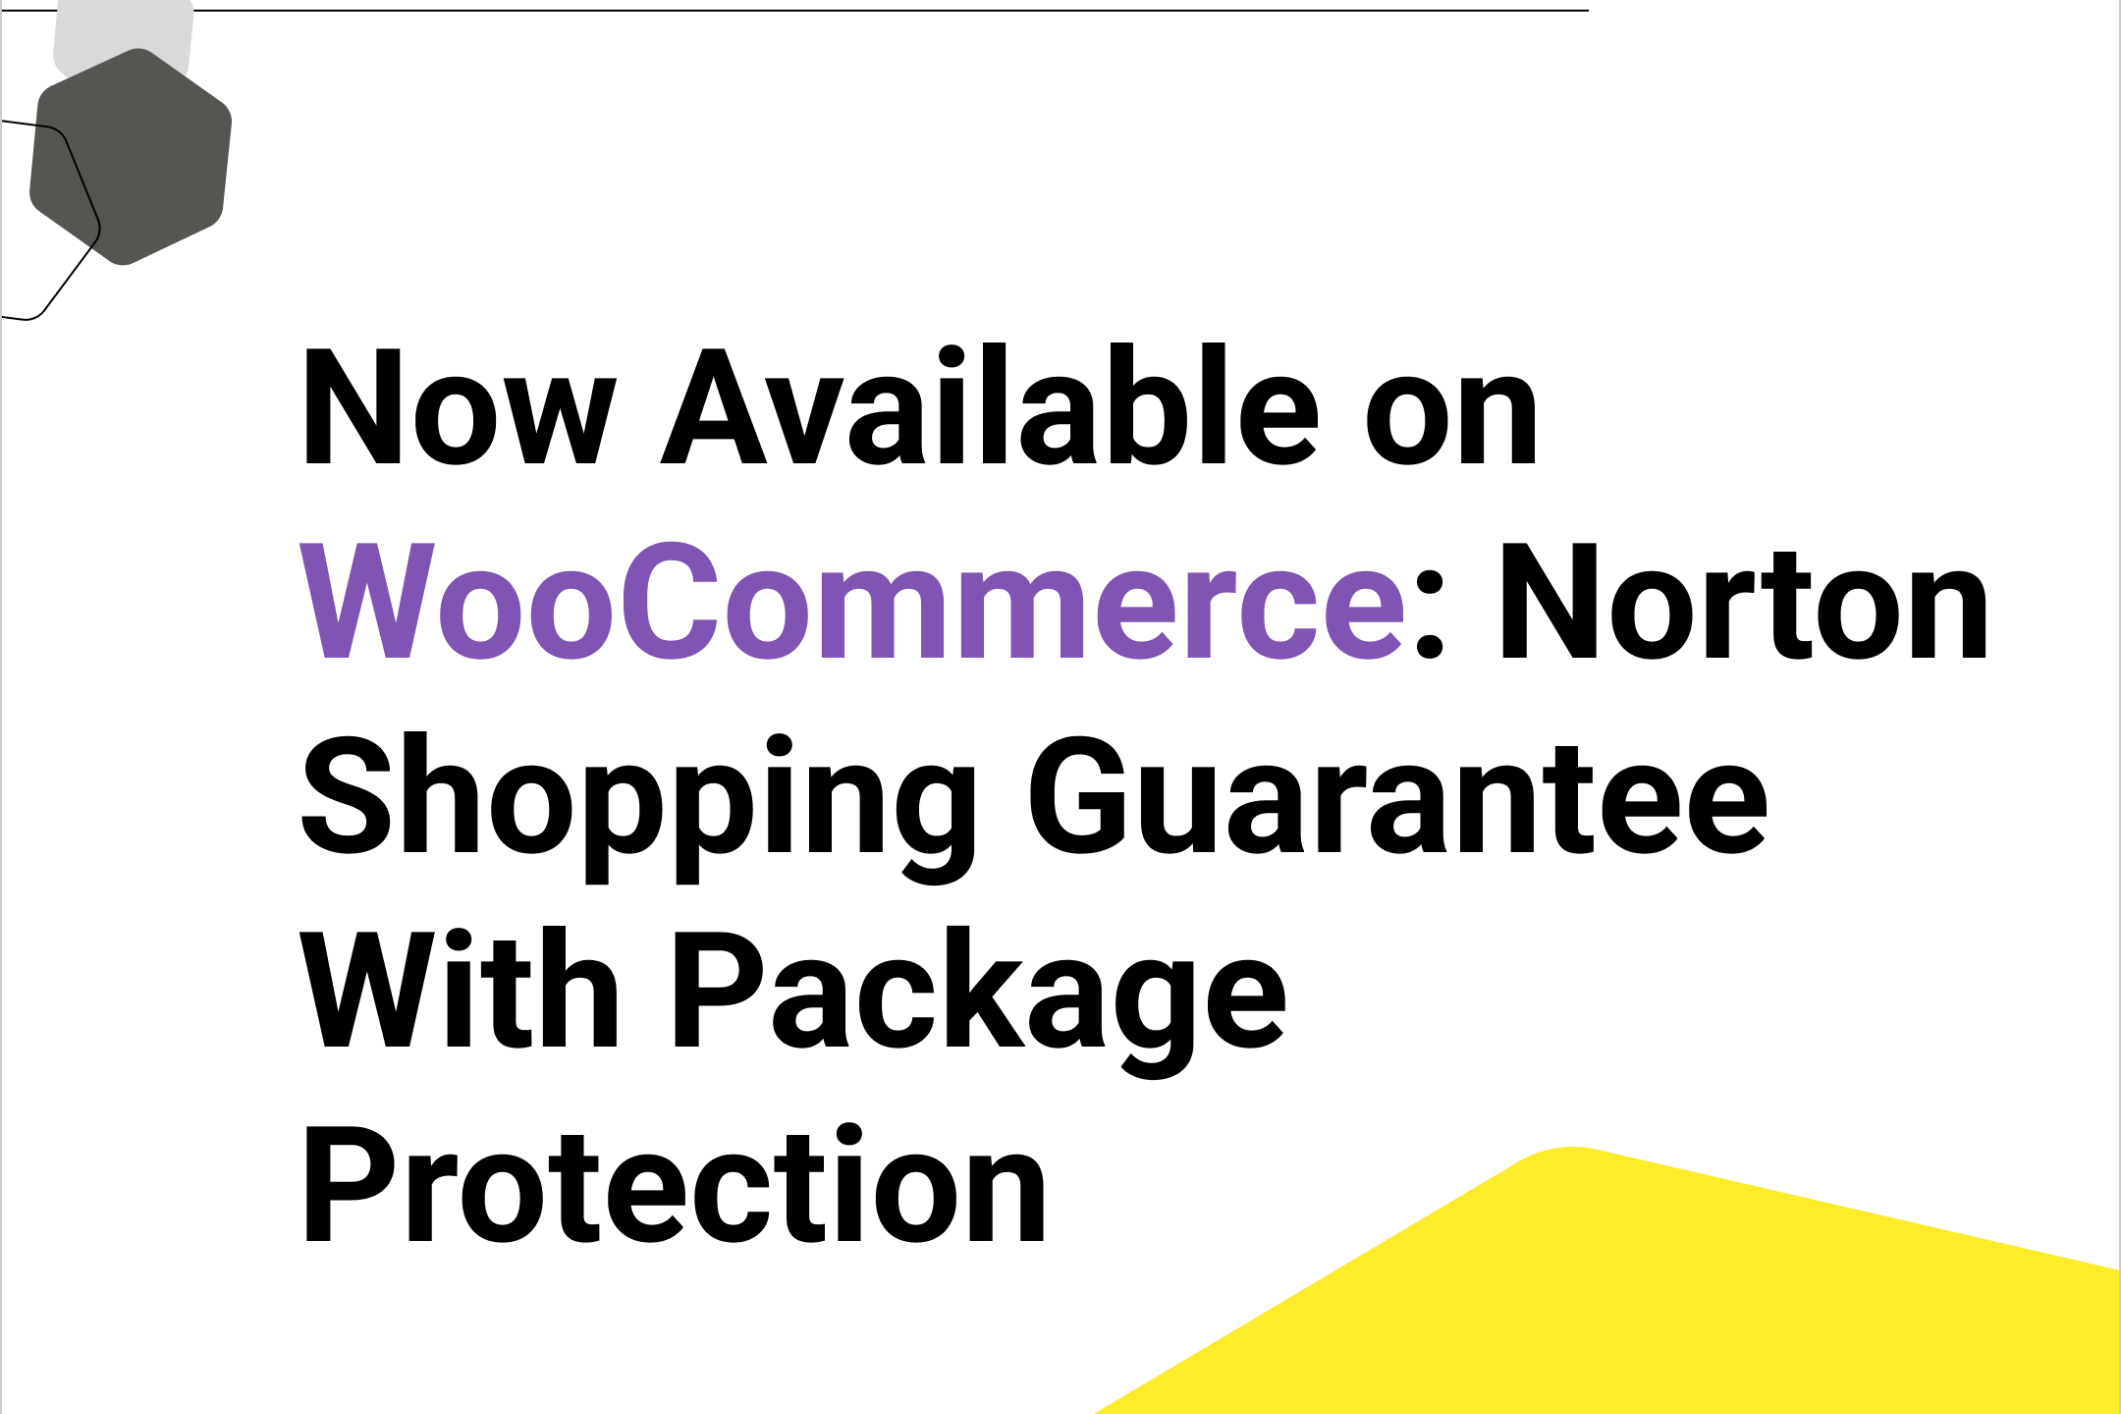 Now Available on WooCommerce: Norton Shopping Guarantee With Package Protection